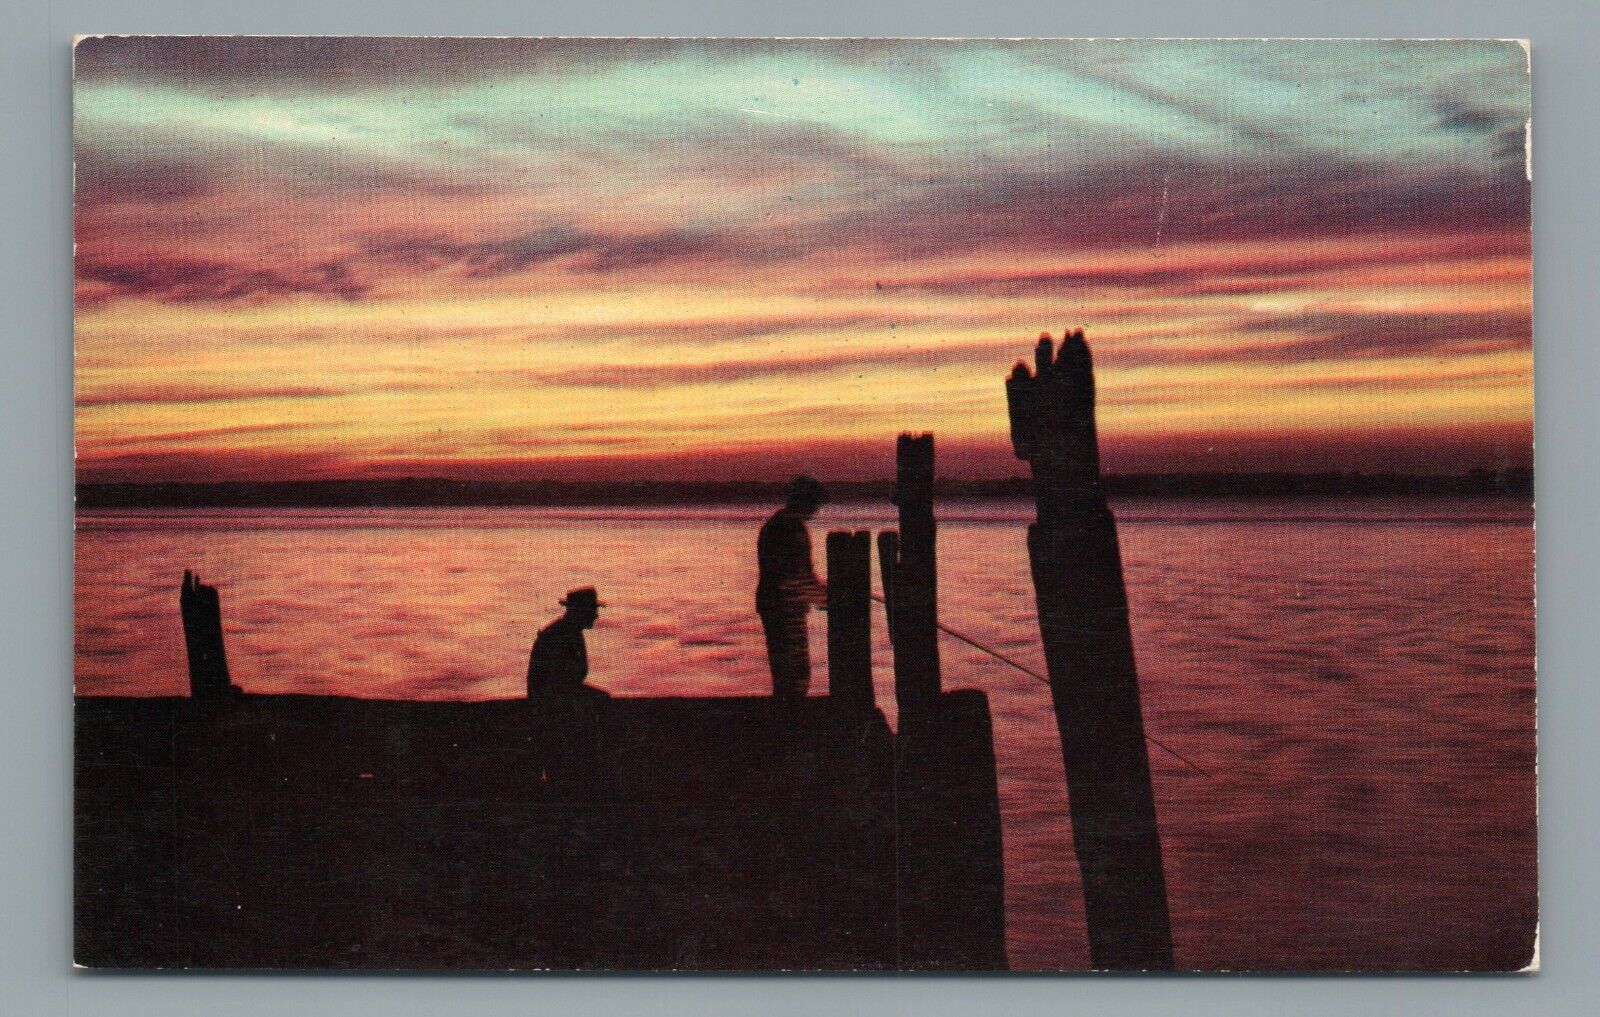 Sunset over the waters, Myrtle Beach, South Carolina Vintage Postcard